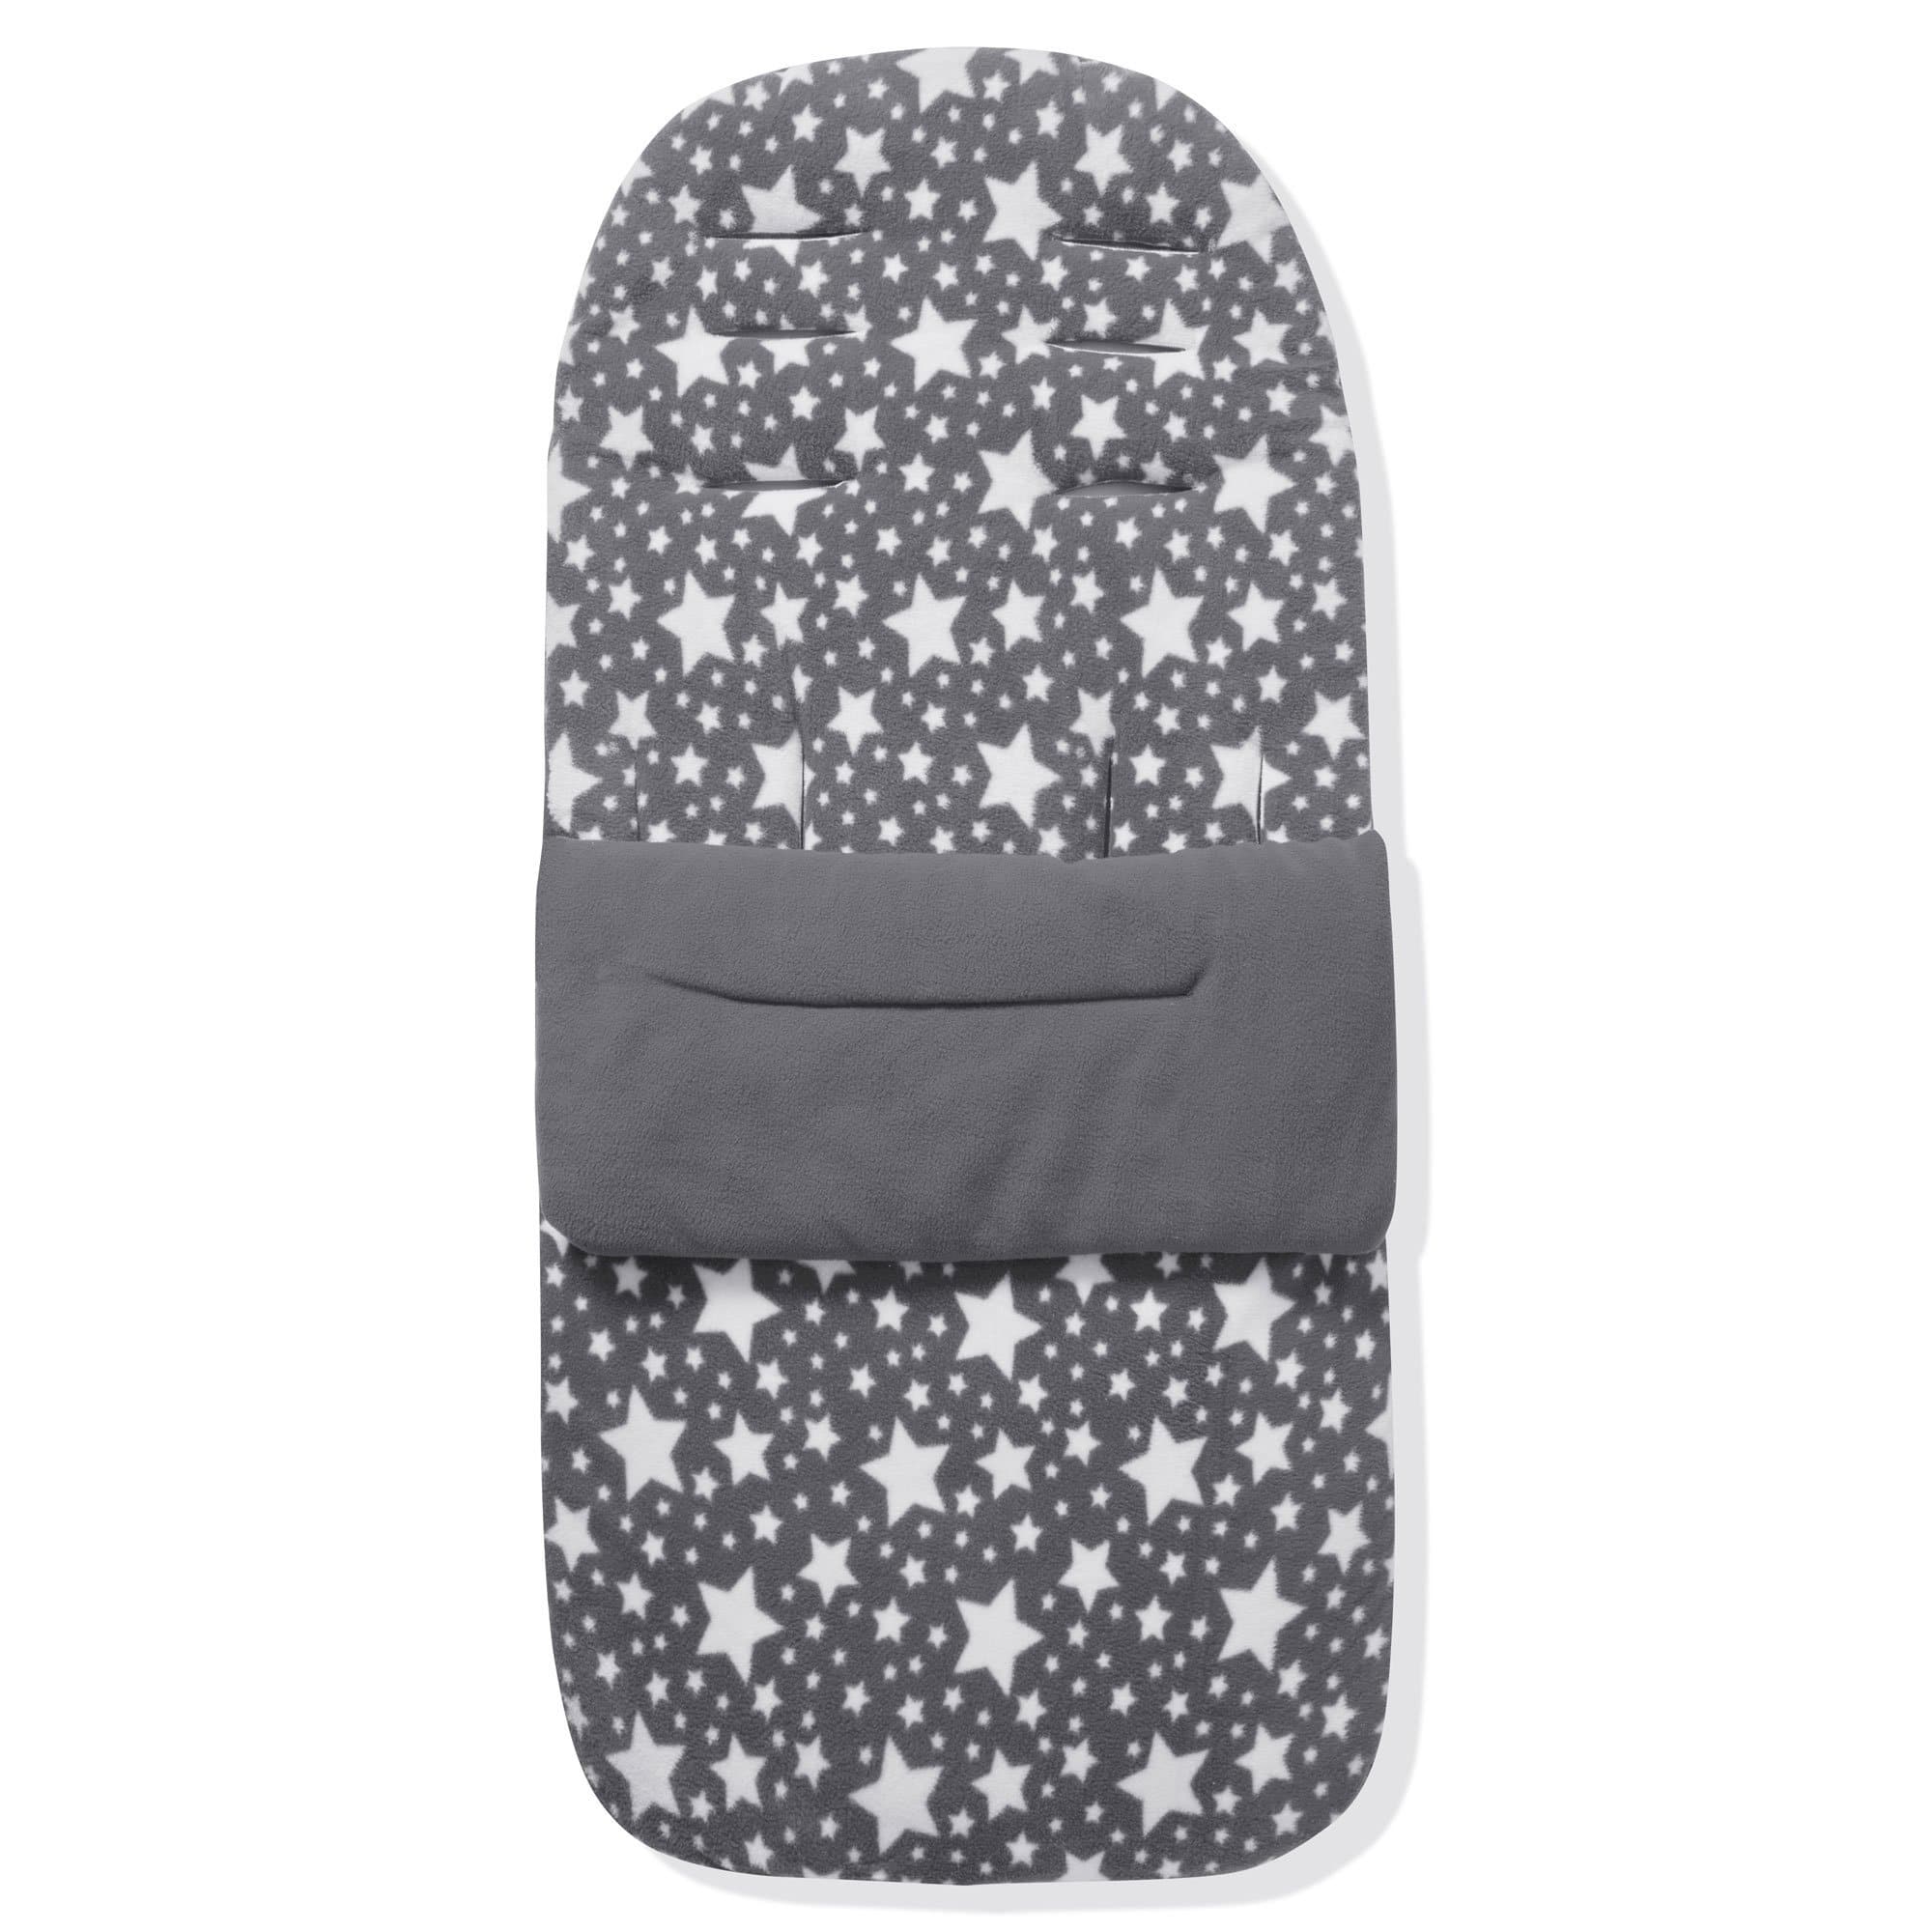 Fleece Footmuff / Cosy Toes Compatible with Babylo - Grey Star / Fits All Models | For Your Little One